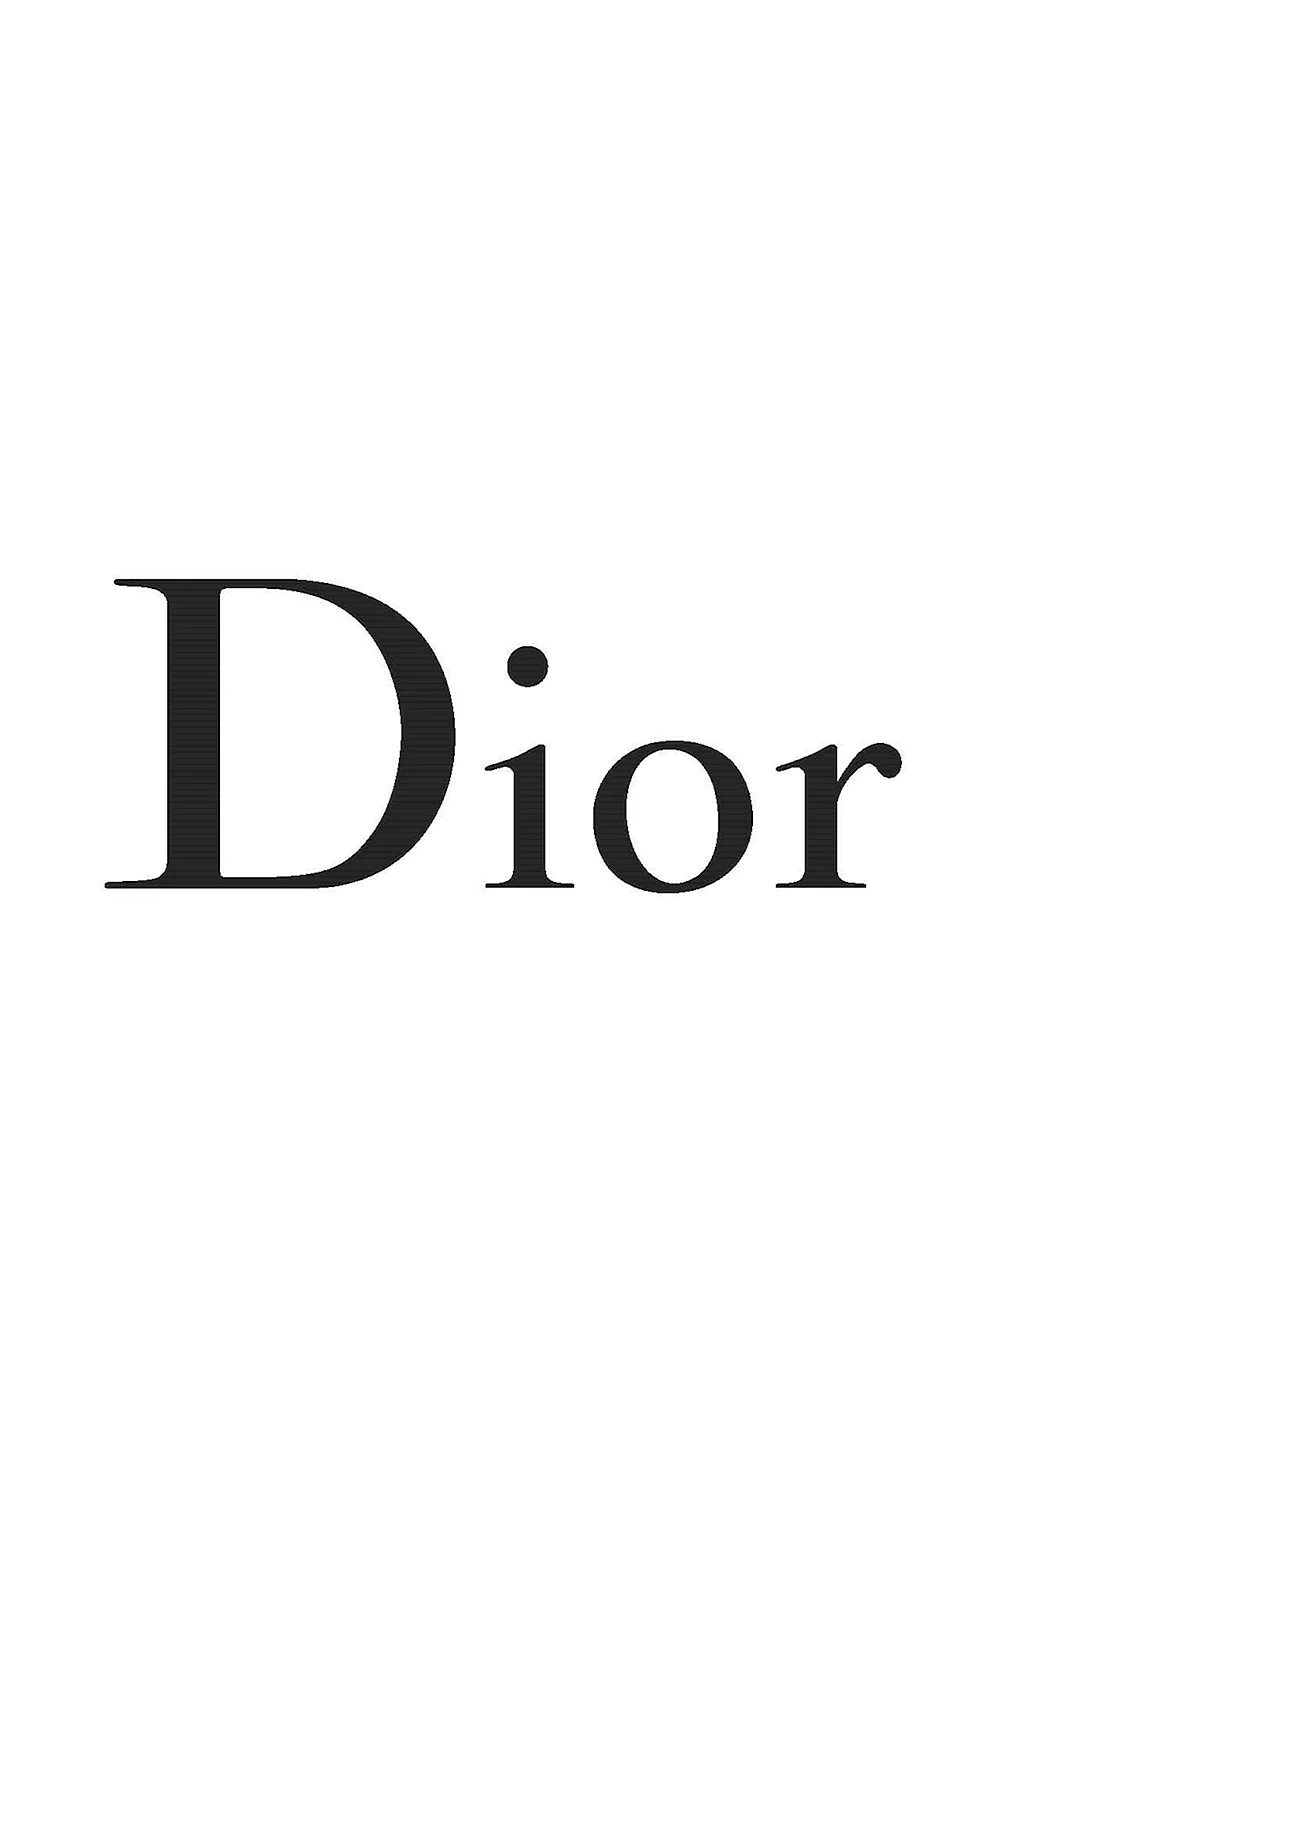 Dior Logo Wallpaper For iPhone